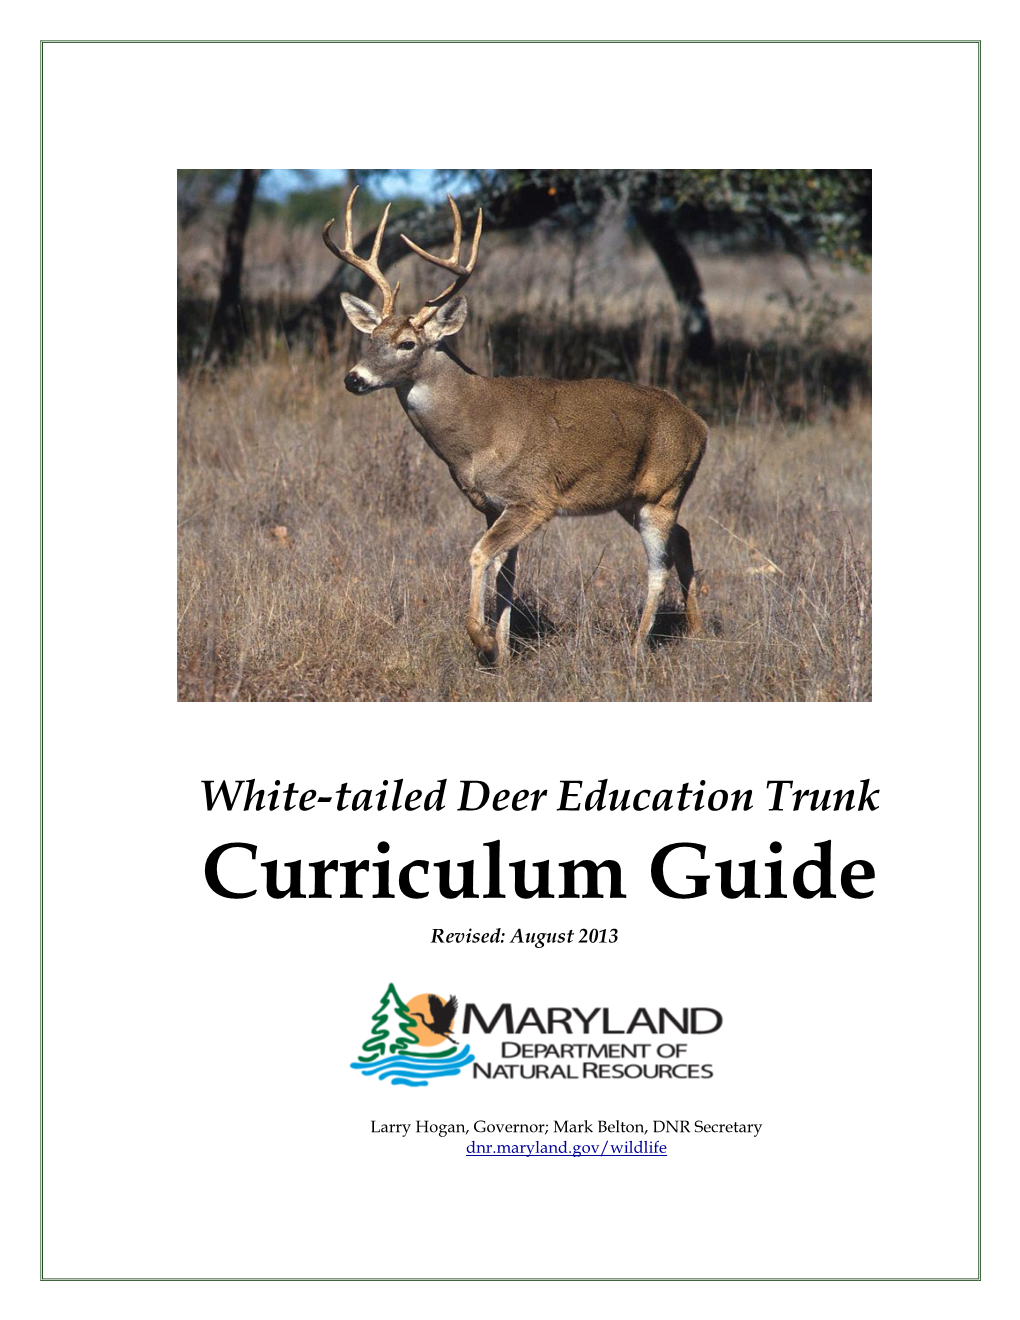 White-Tailed Deer Education Trunk Curriculum Guide Revised: August 2013